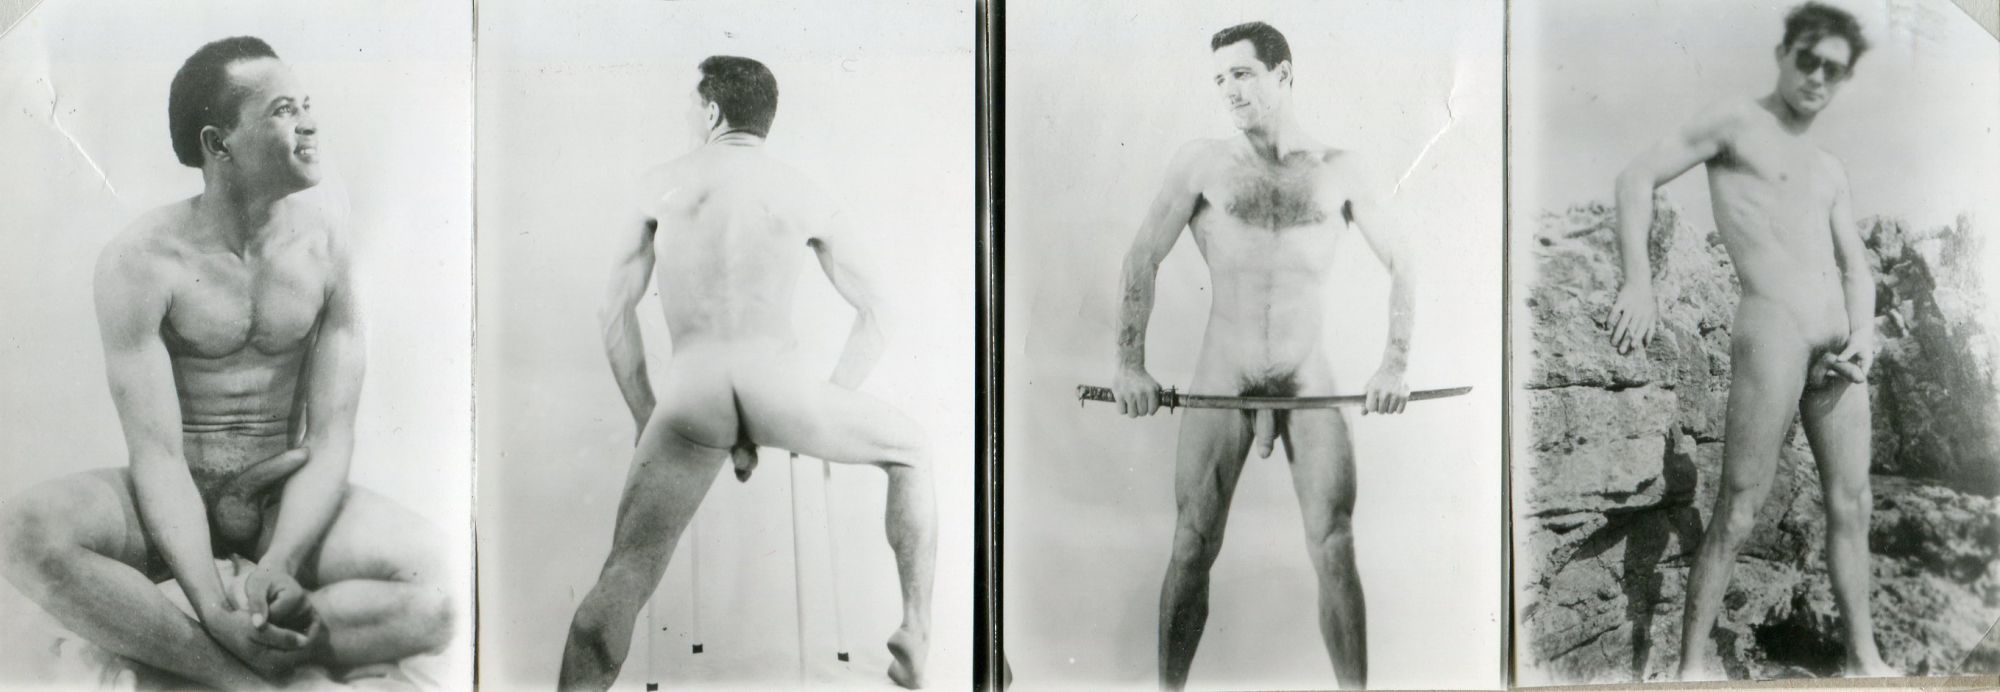 The Naked Past: A Collection of Vintage Male Nudity